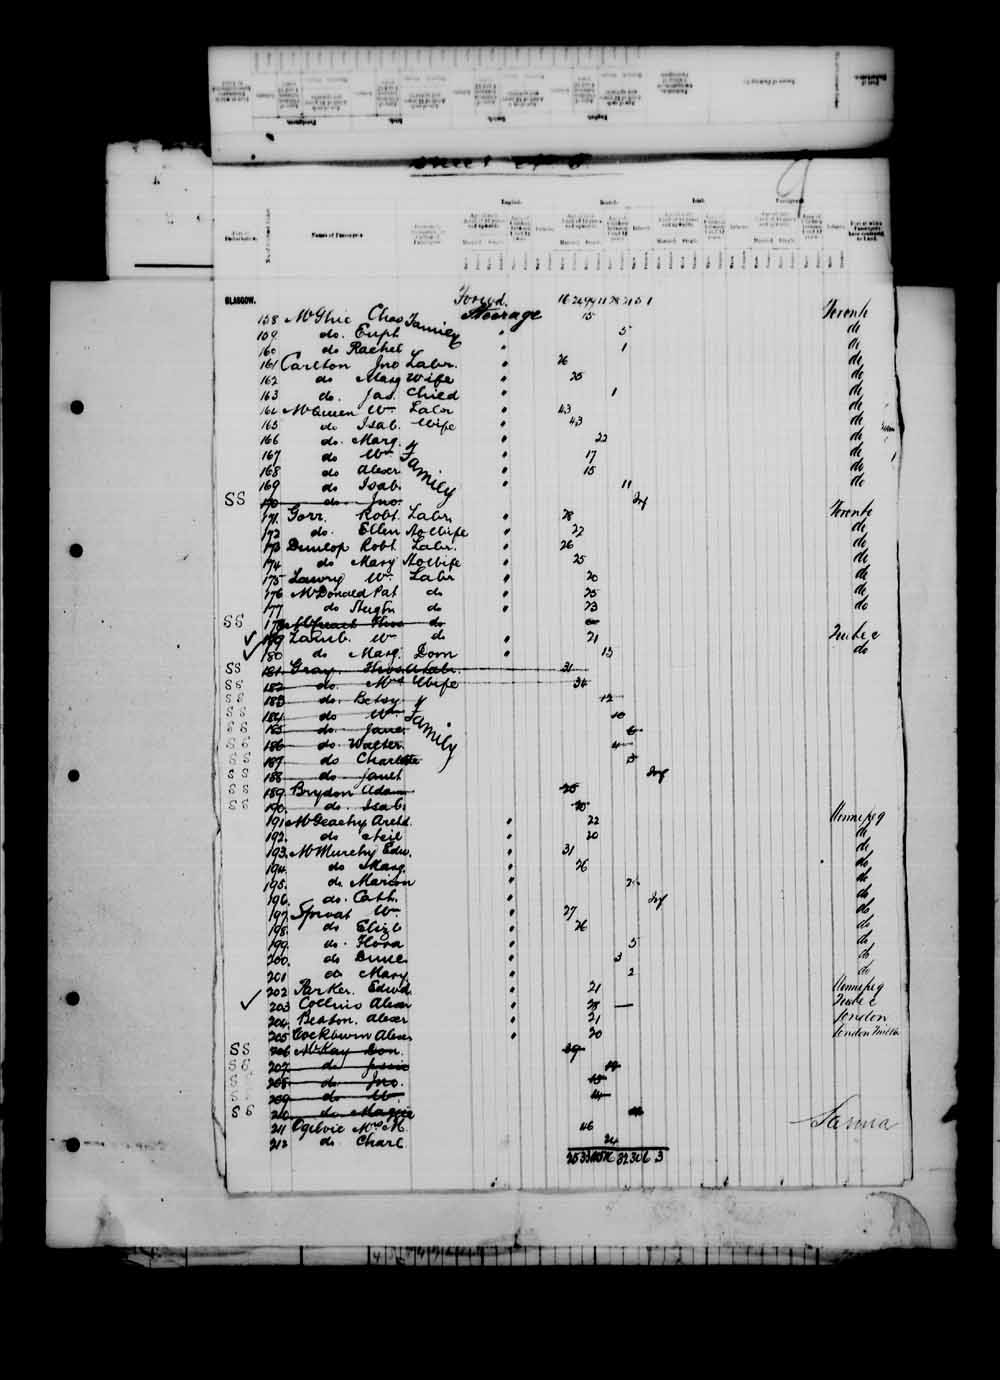 Digitized page of Passenger Lists for Image No.: e003542771